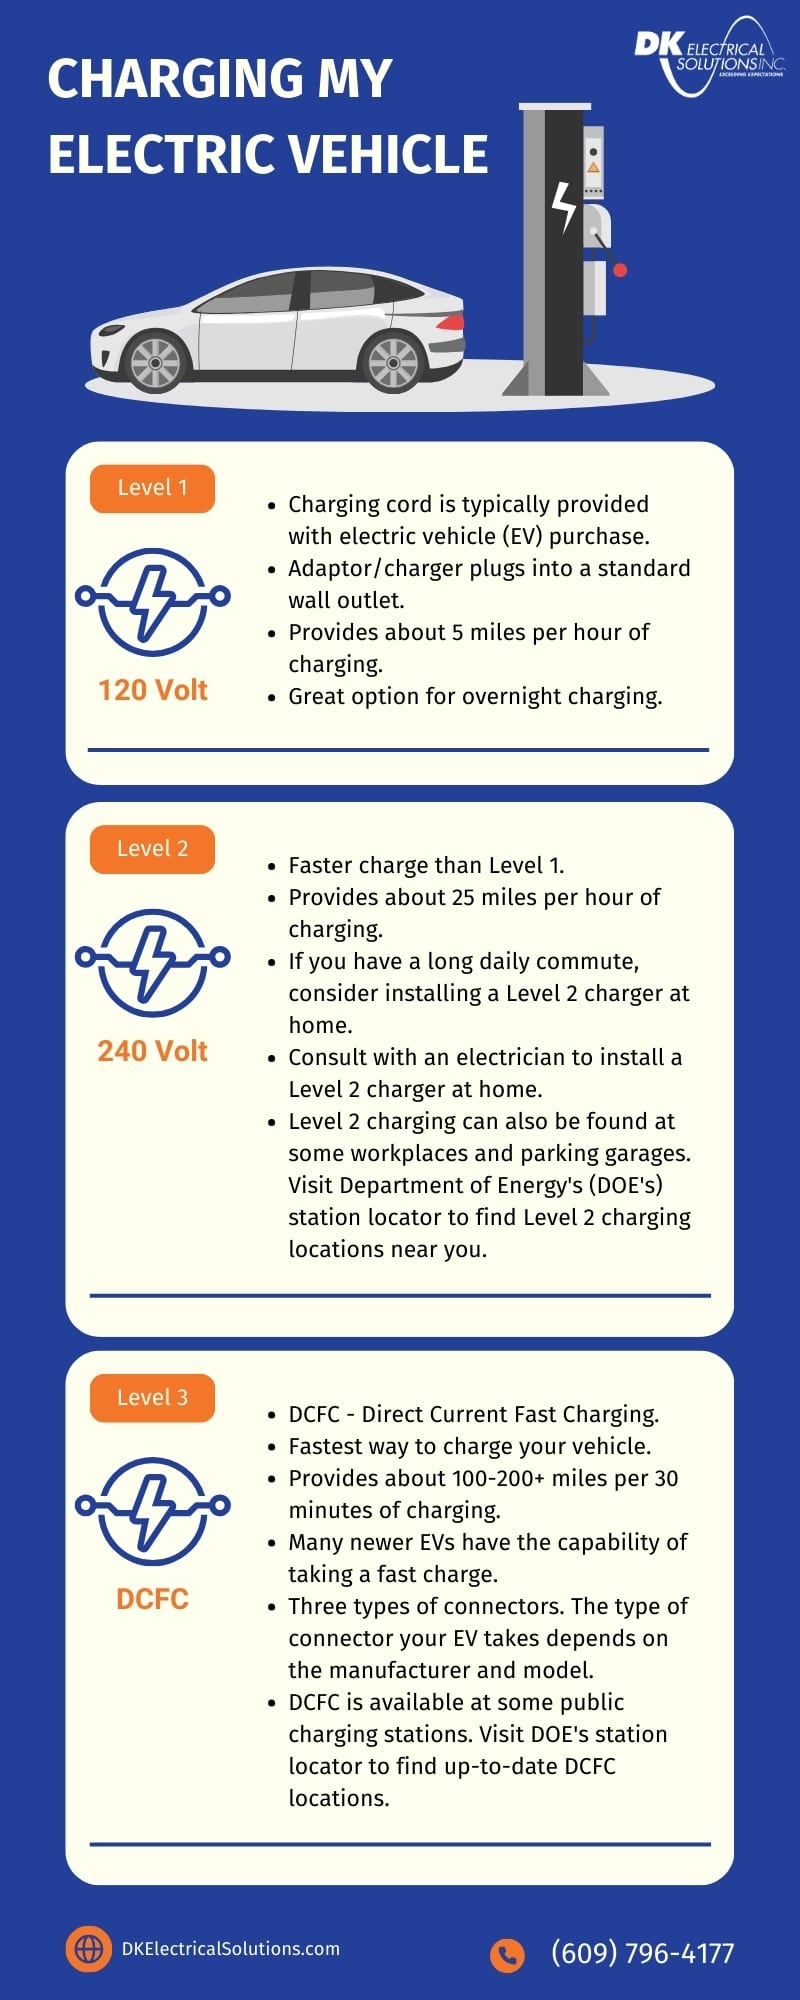 Infographic explaining three levels of electric car charger: level 1 for standard outlets, level 2 for faster home charging, and level 3 for rapid charging at stations.